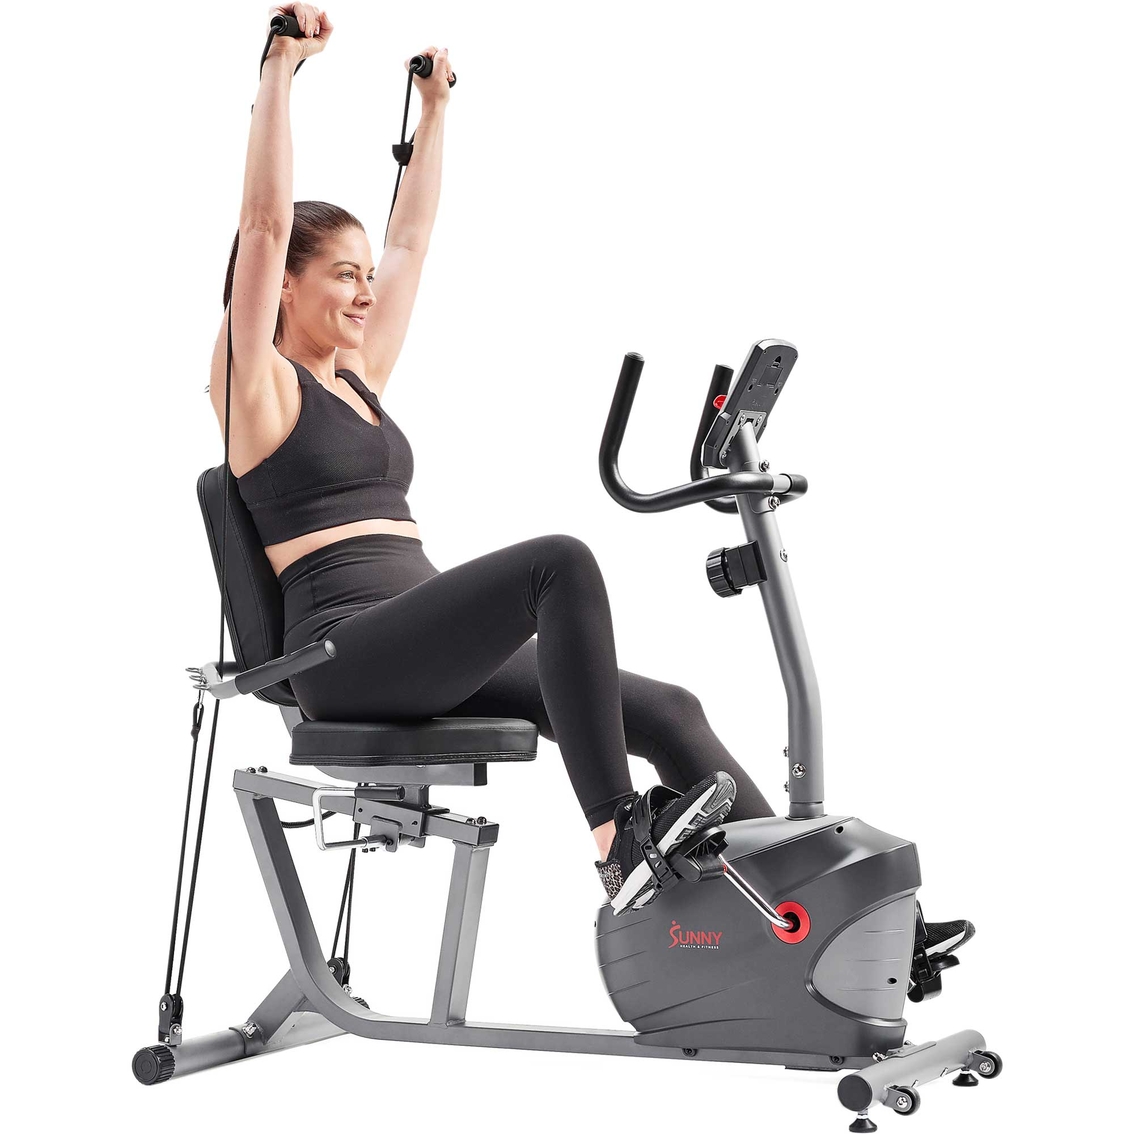 Sunny Health and Fitness Performance Interactive Series Recumbent Exercise Bike - Image 4 of 10